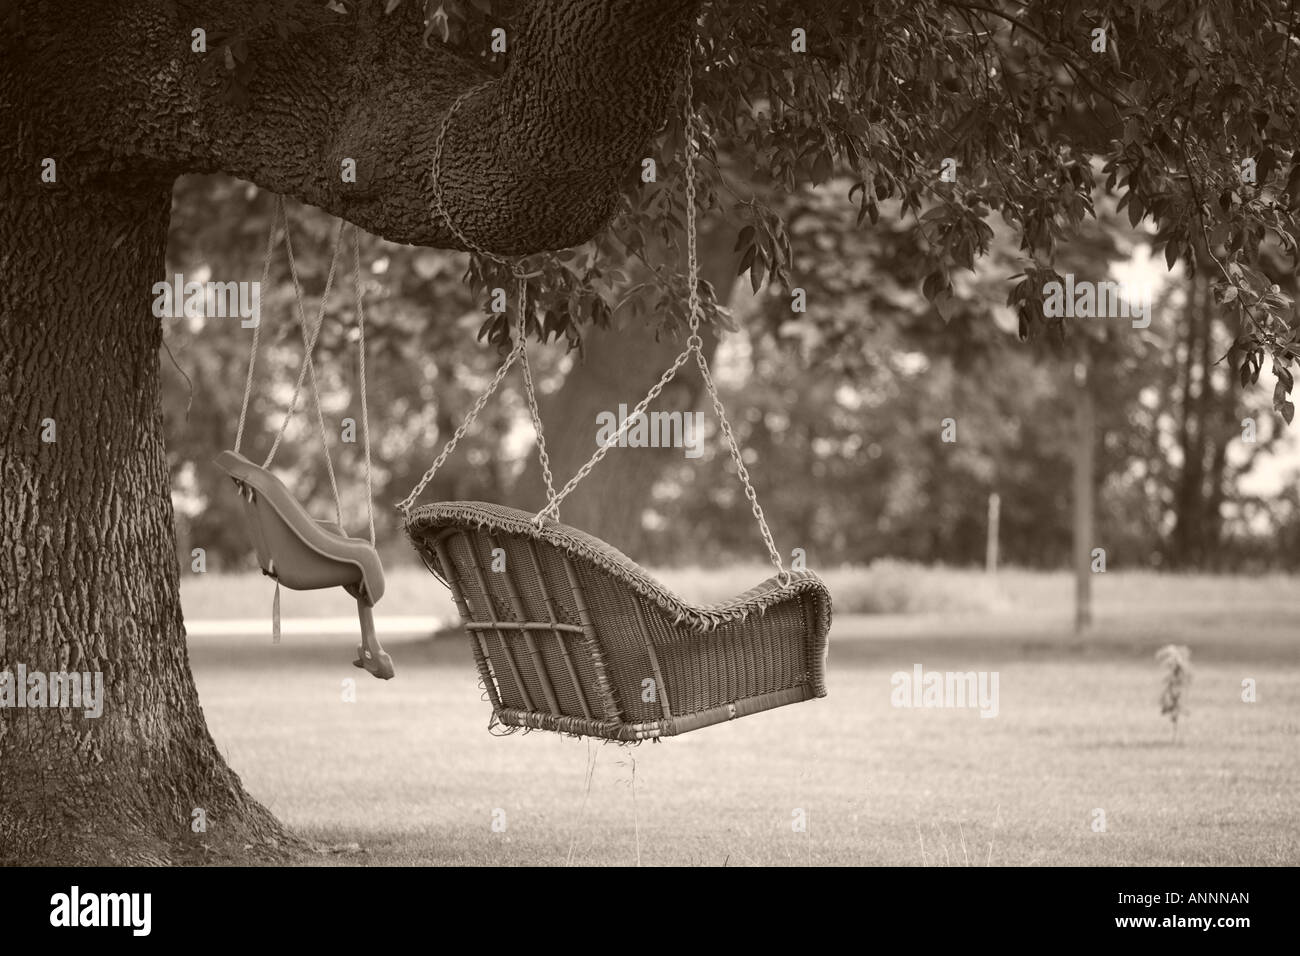 TWO TREE SWINGS ON ONE TREE ONE MADE OF A CHILD S CAR SEAT AND THE OTHER FROM A PART OF A WICKER SOFA Stock Photo